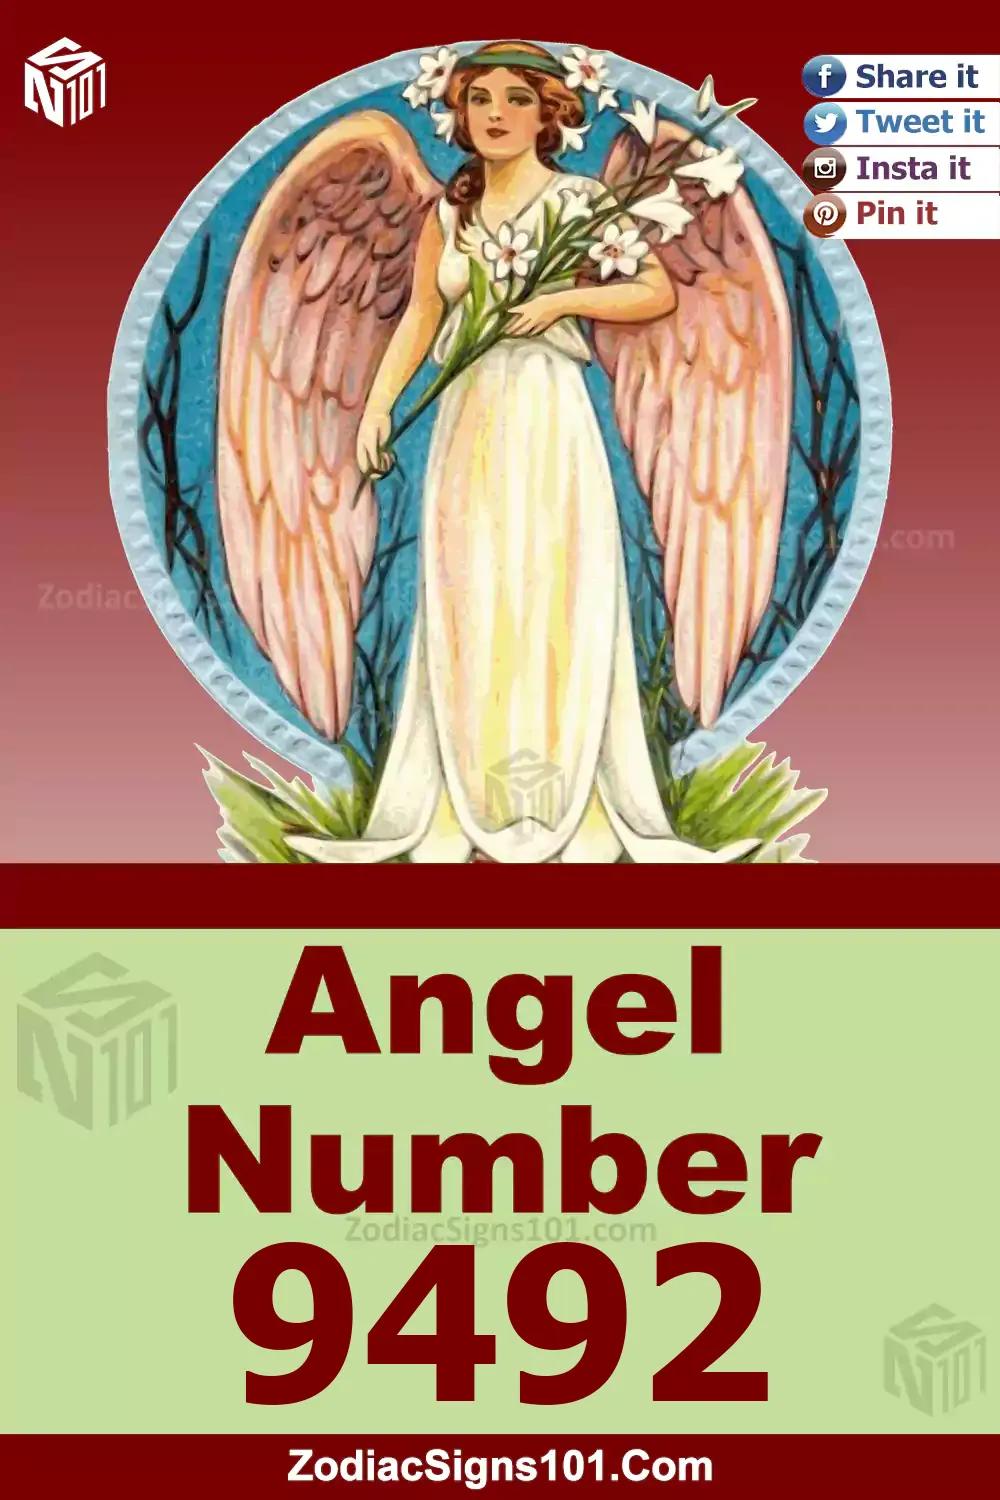 9492 Angel Number Meaning